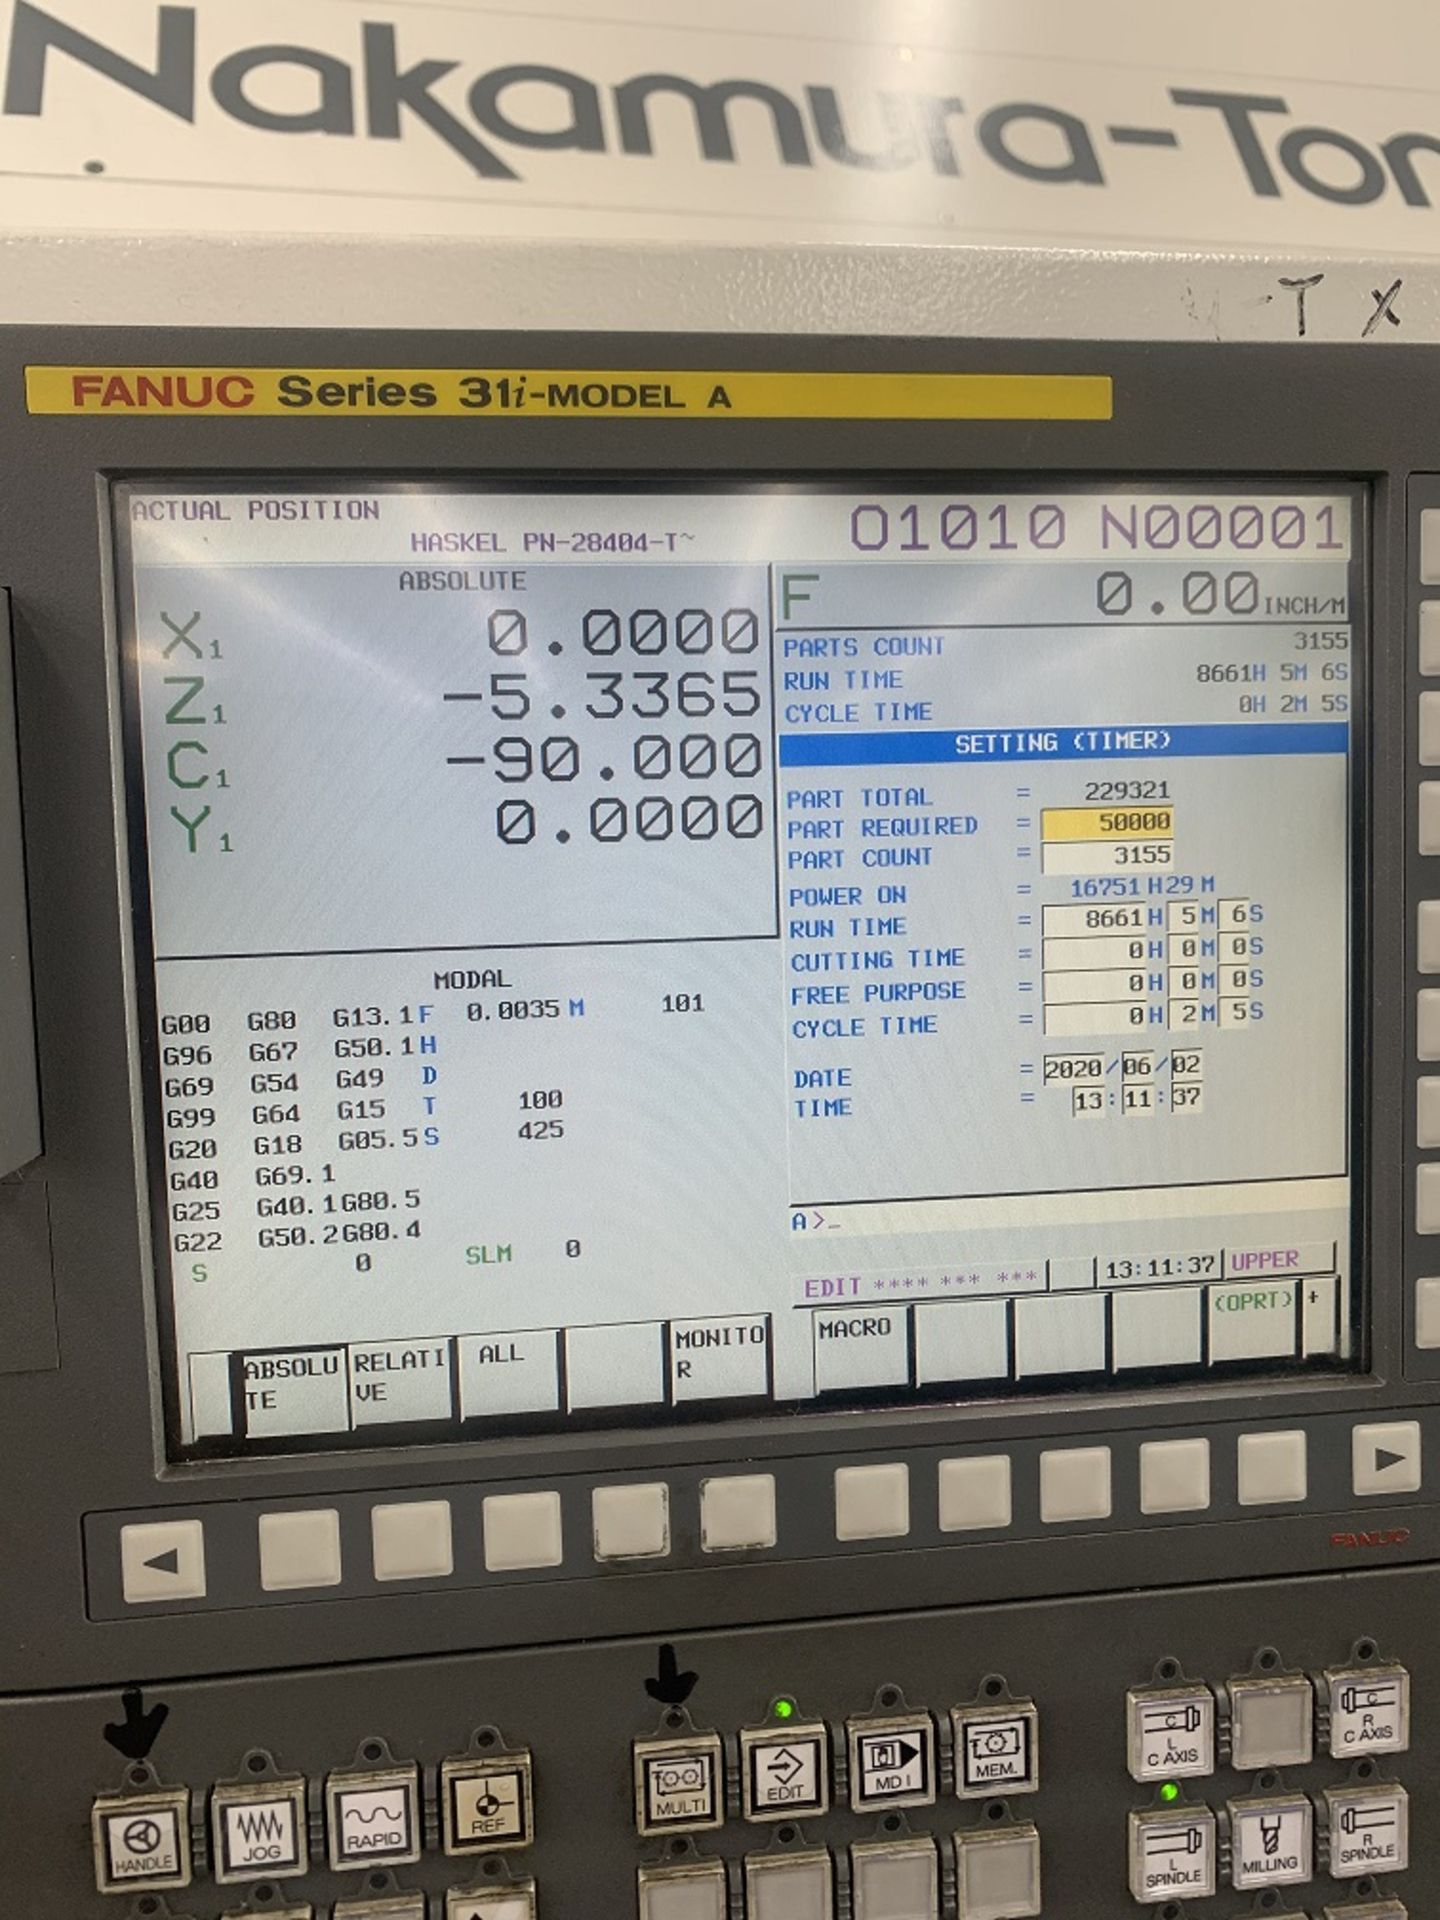 2011 NAKAMURA TOME WY-250MMYY CNC TURNING CENTER, 10" CHUCK, 2.5" BAR CAPACITY, FANUC 31IT CNC CONTR - Image 8 of 9